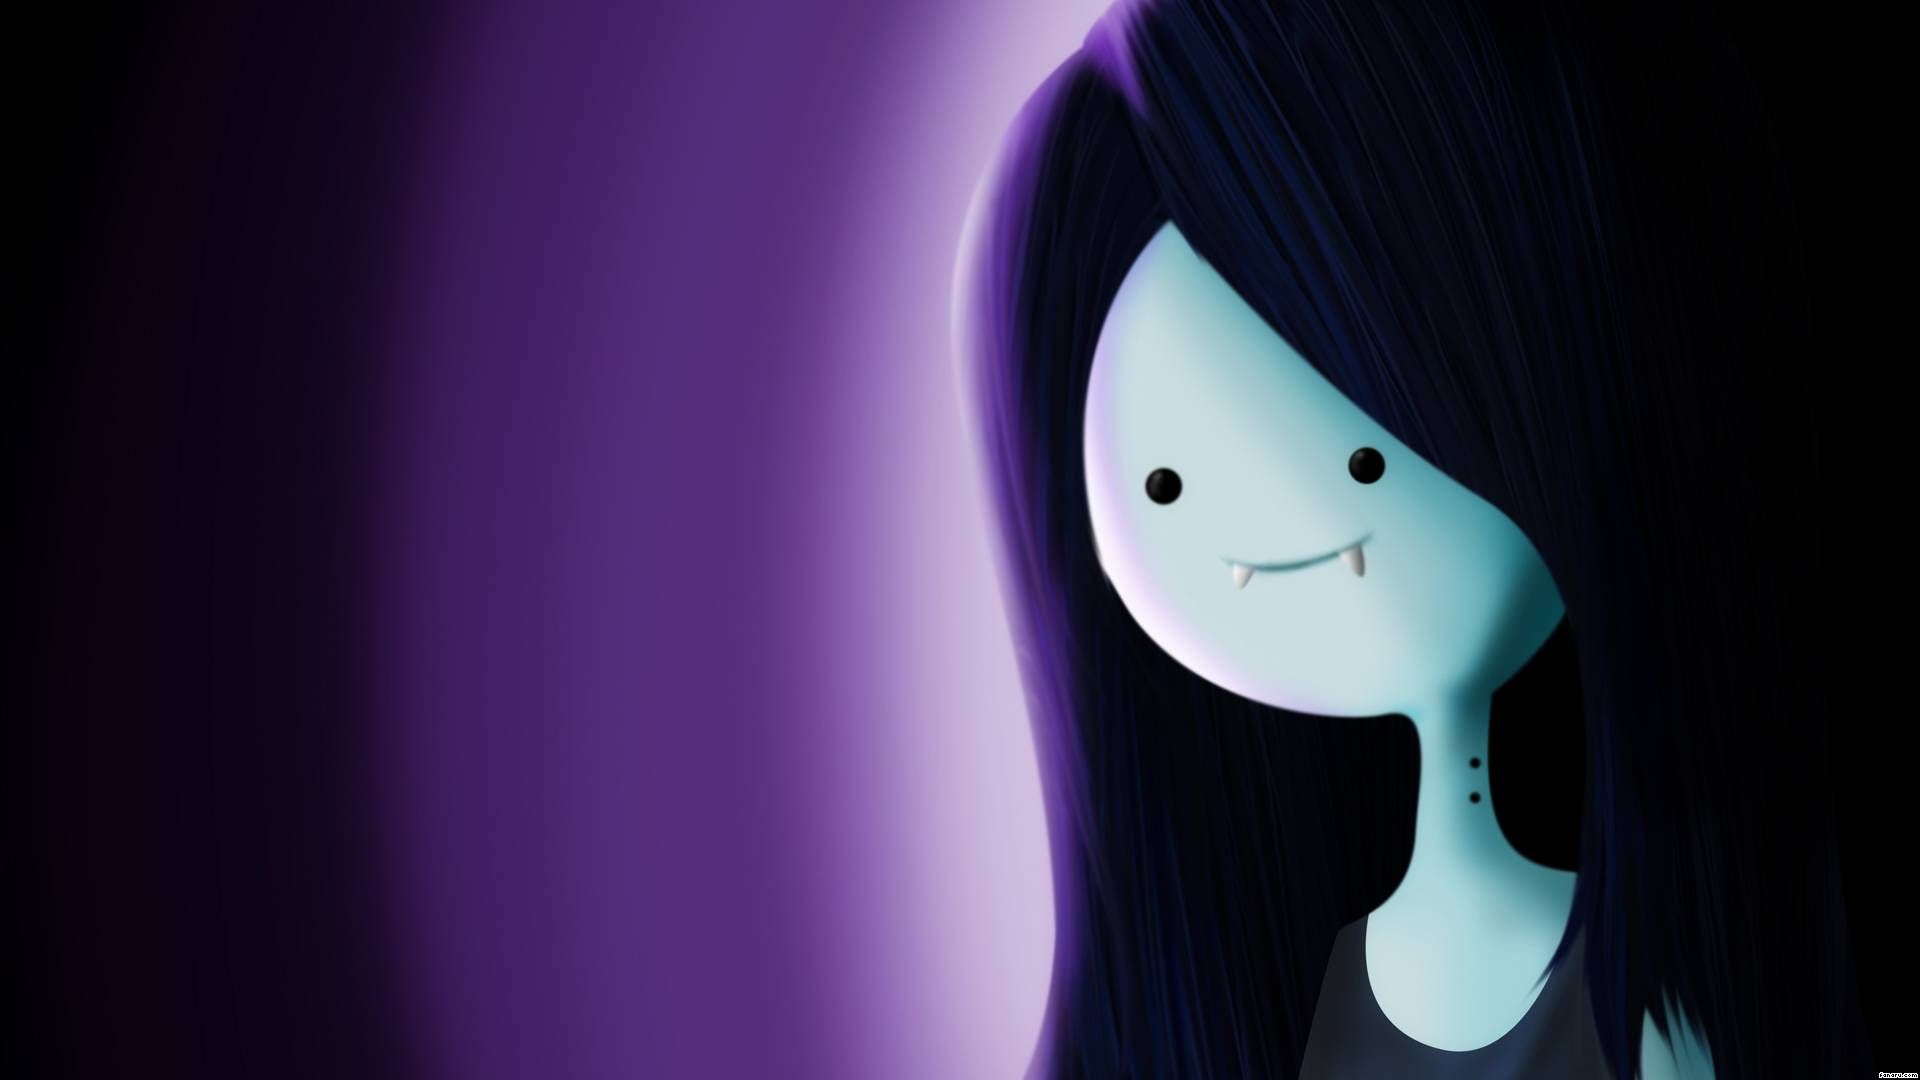 Free Download Adventure Time Marceline Hd Wallpaper Flame Princess Images, Photos, Reviews